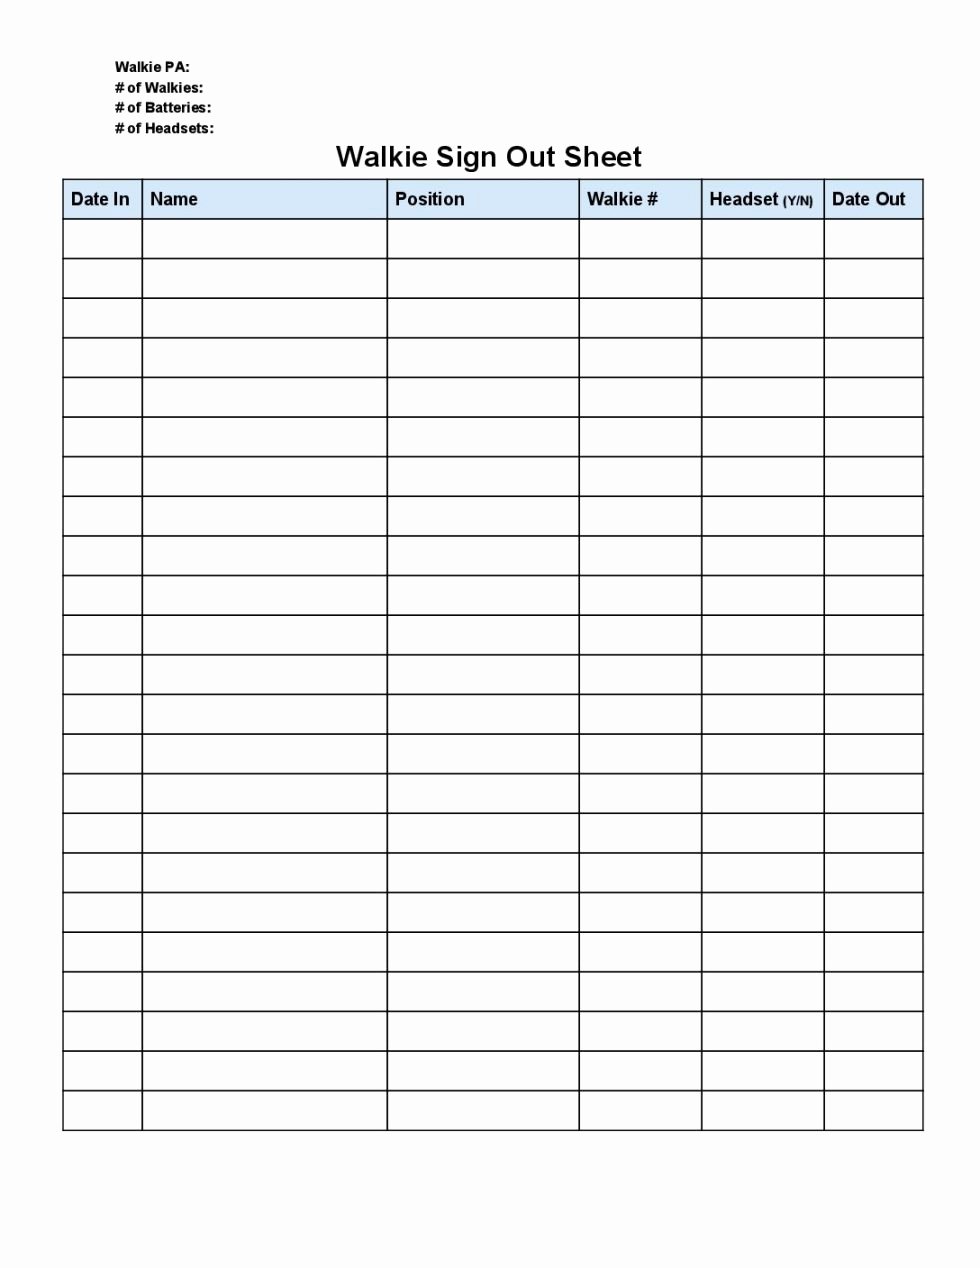 Signing In and Out form Beautiful Walkie Sign Out Sheet Free Template Makers